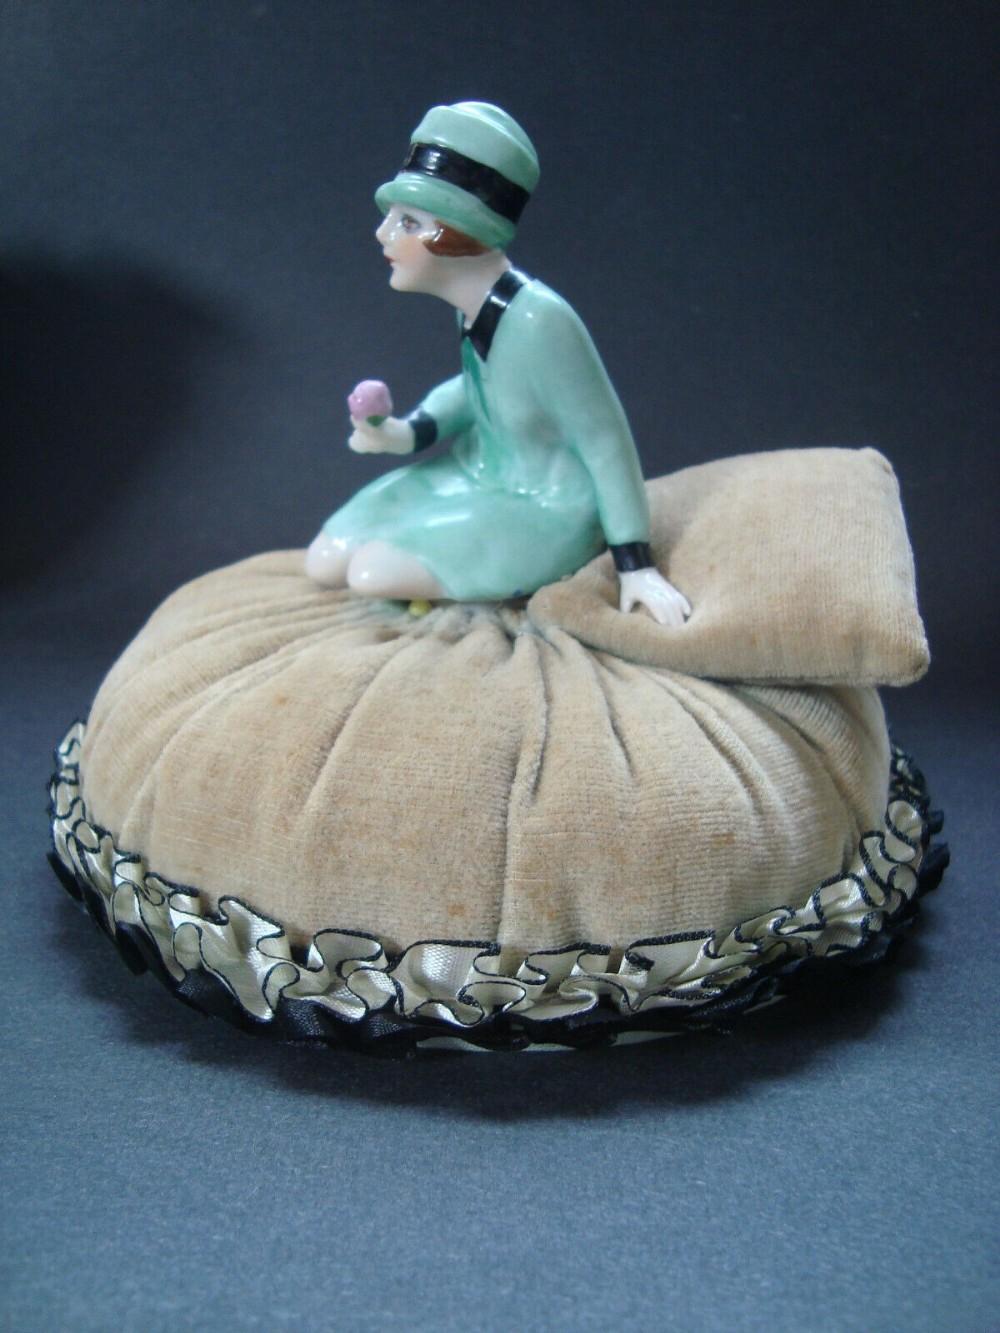 Art Deco Rare Pin Cushion Doll by Fasold & Stuach, c1930 In Good Condition For Sale In Devon, England